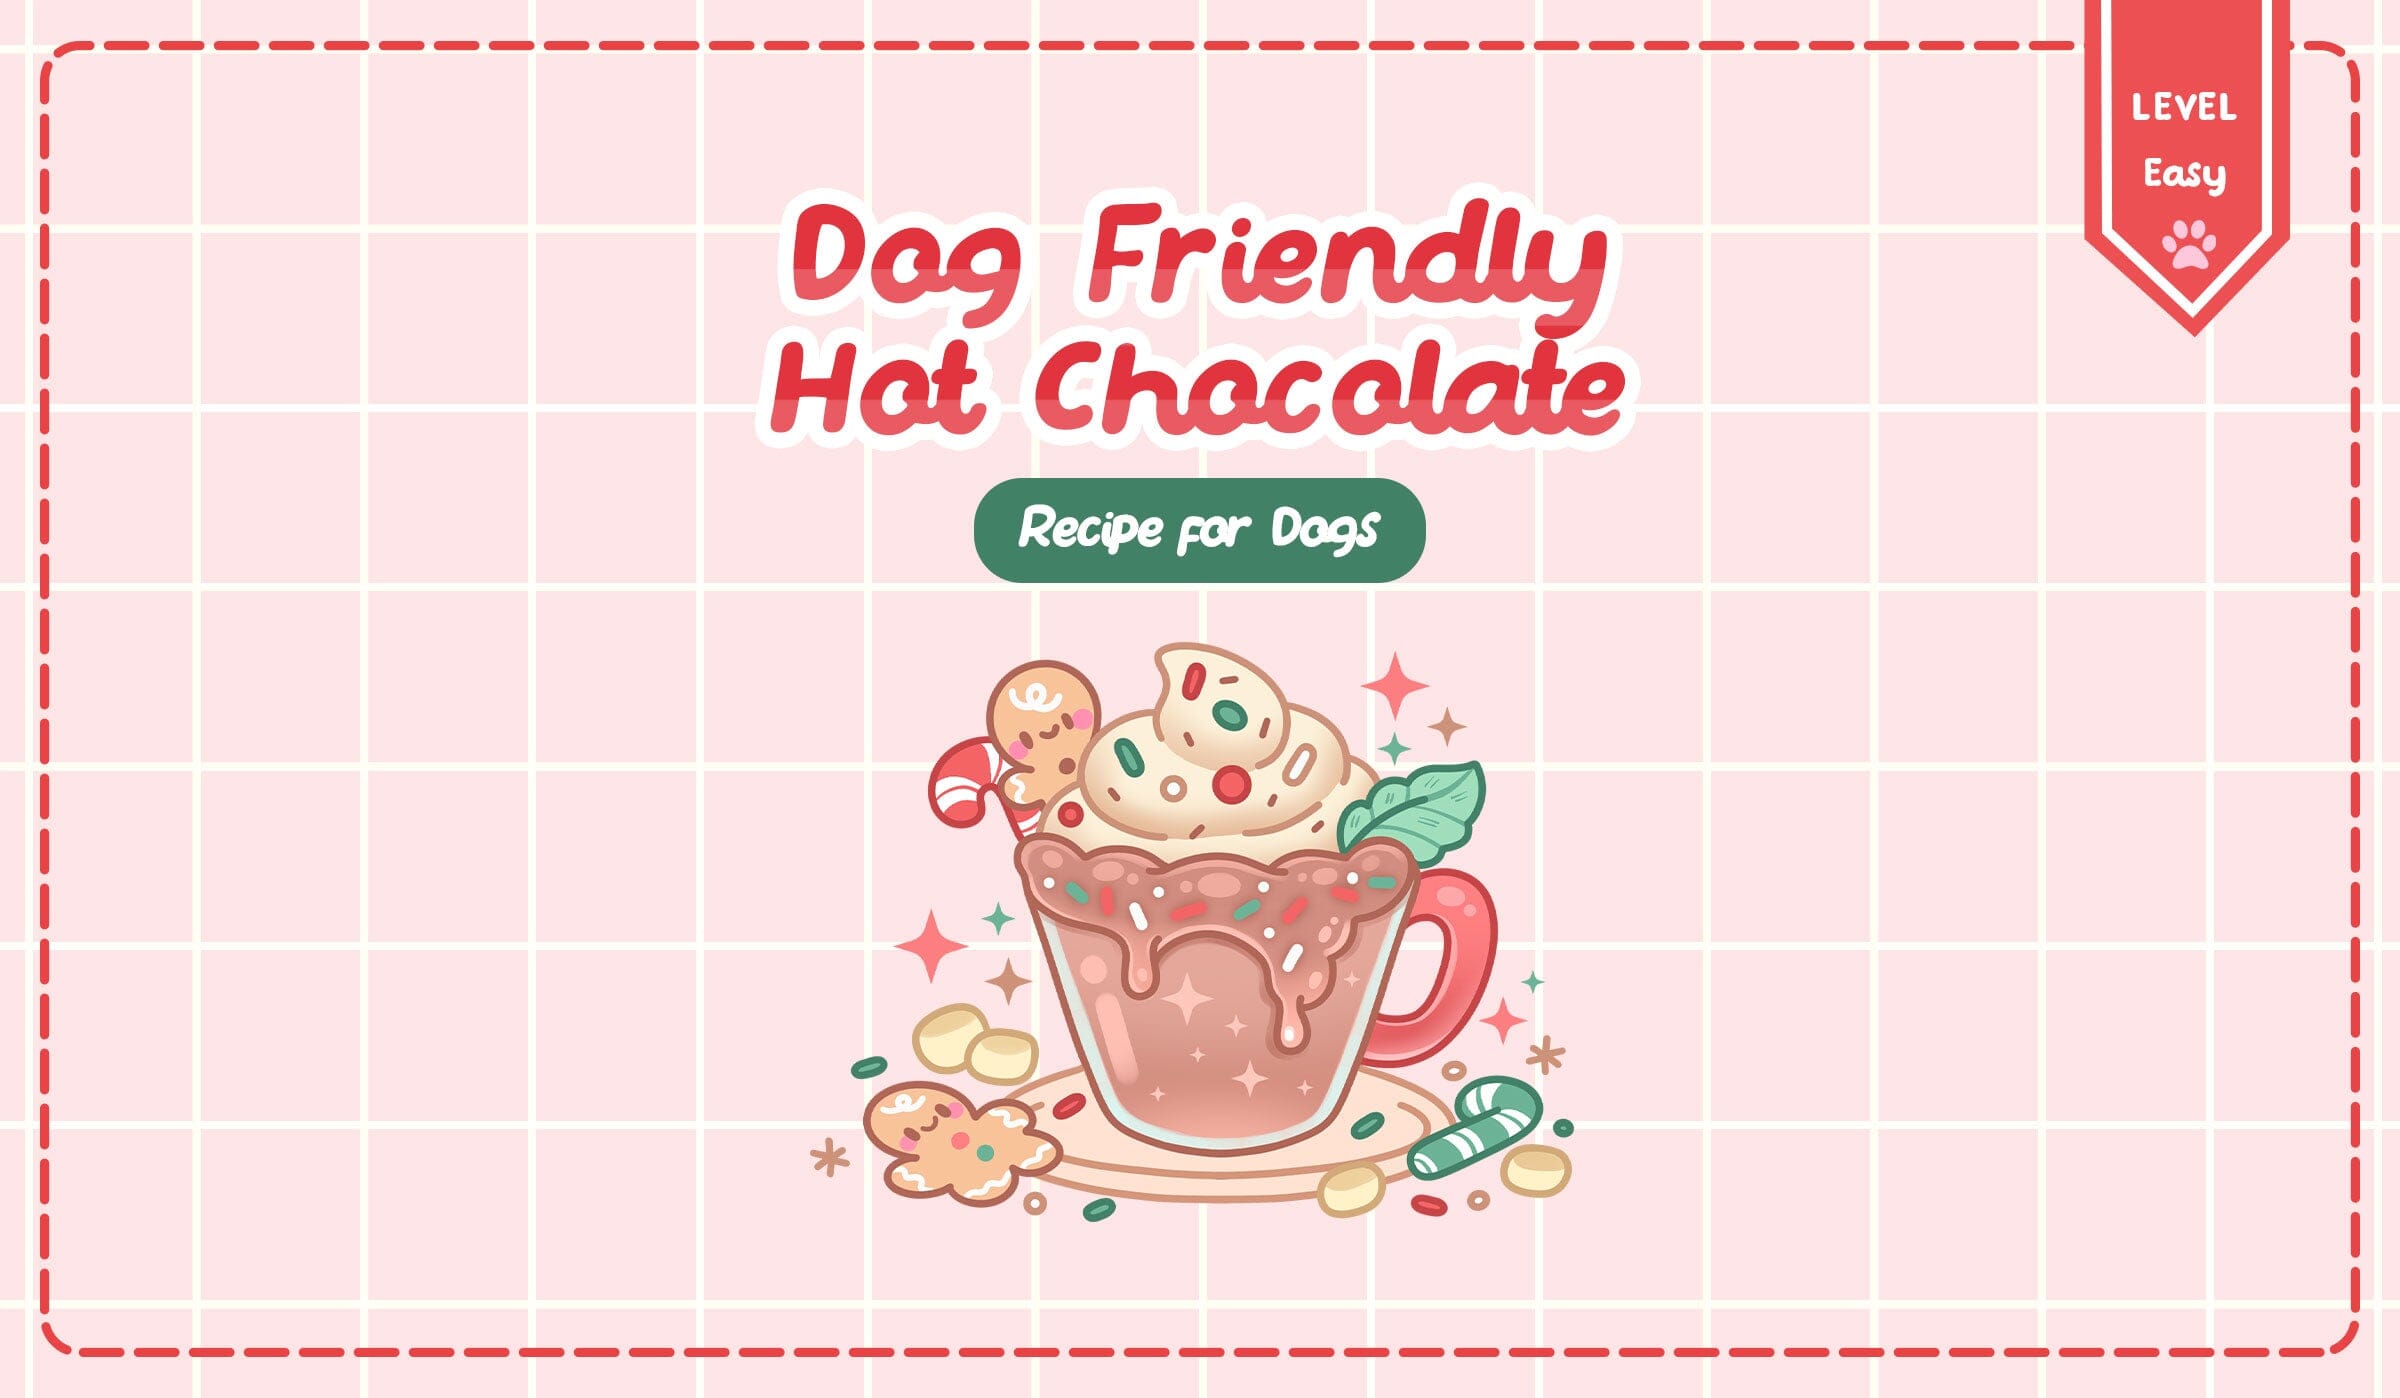 How to Make Dog Friendly Hot Chocolate